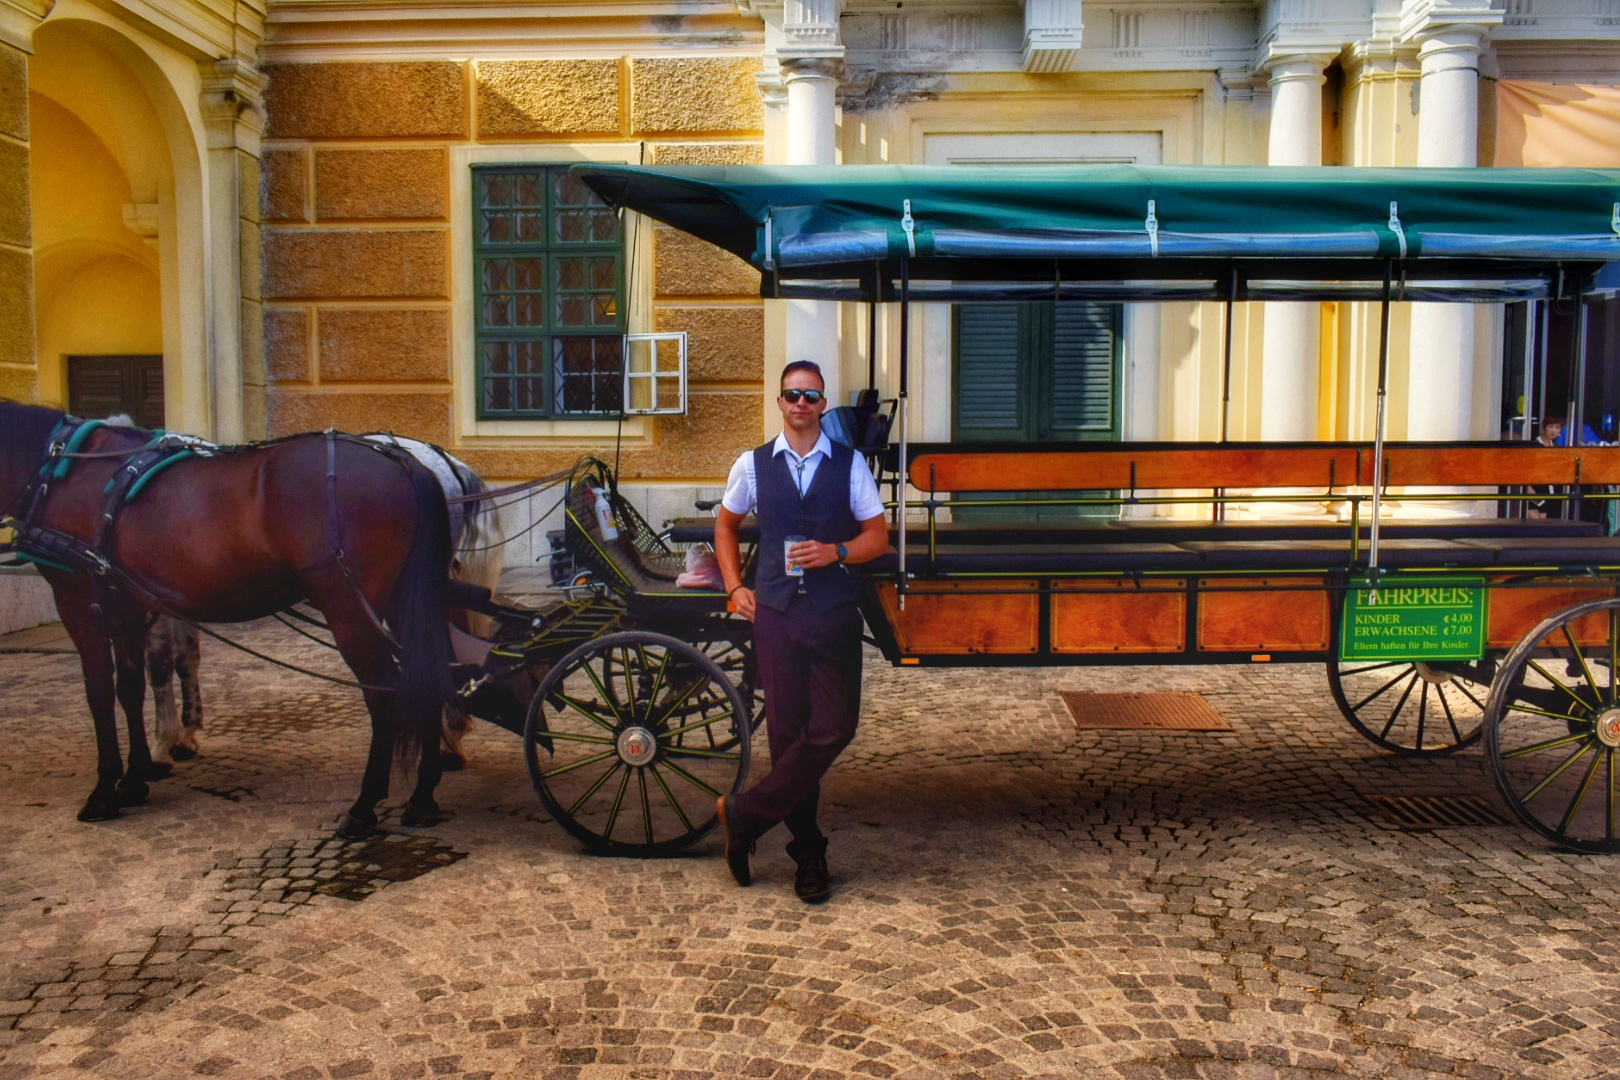 Mr. Joe with his carriage